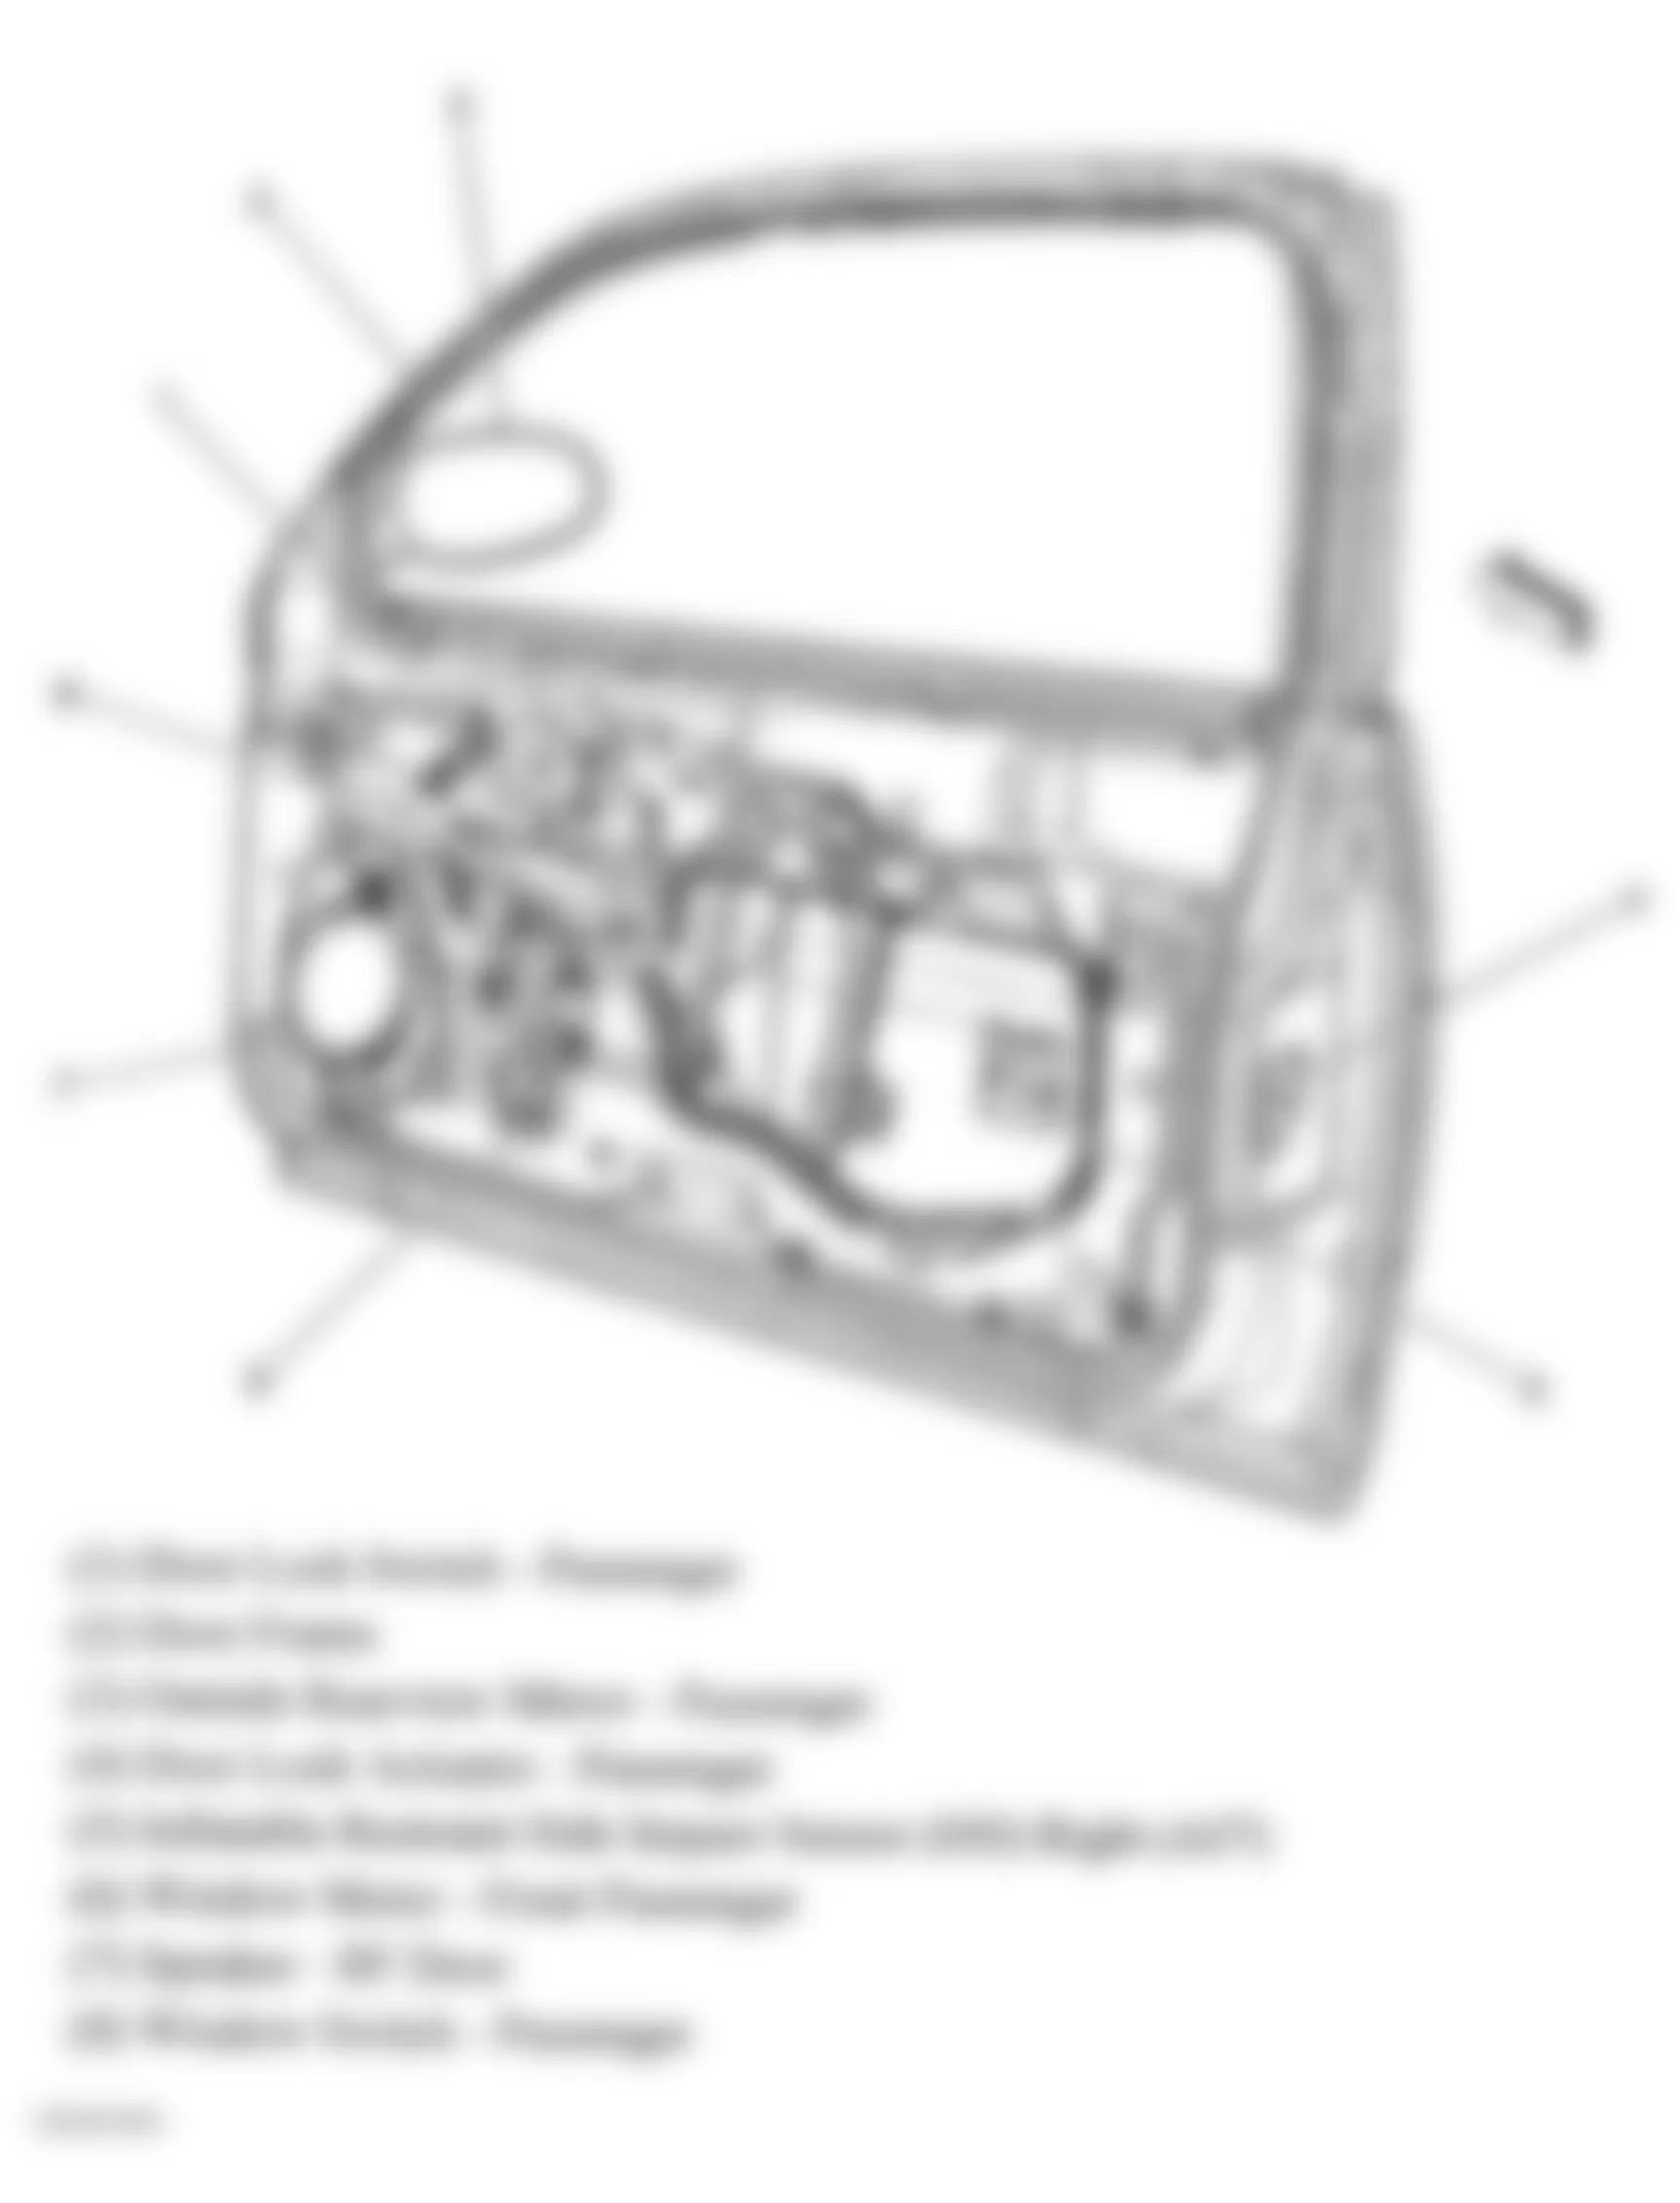 Chevrolet Monte Carlo LT 2006 - Component Locations -  Right Front Door Components (Coupe)